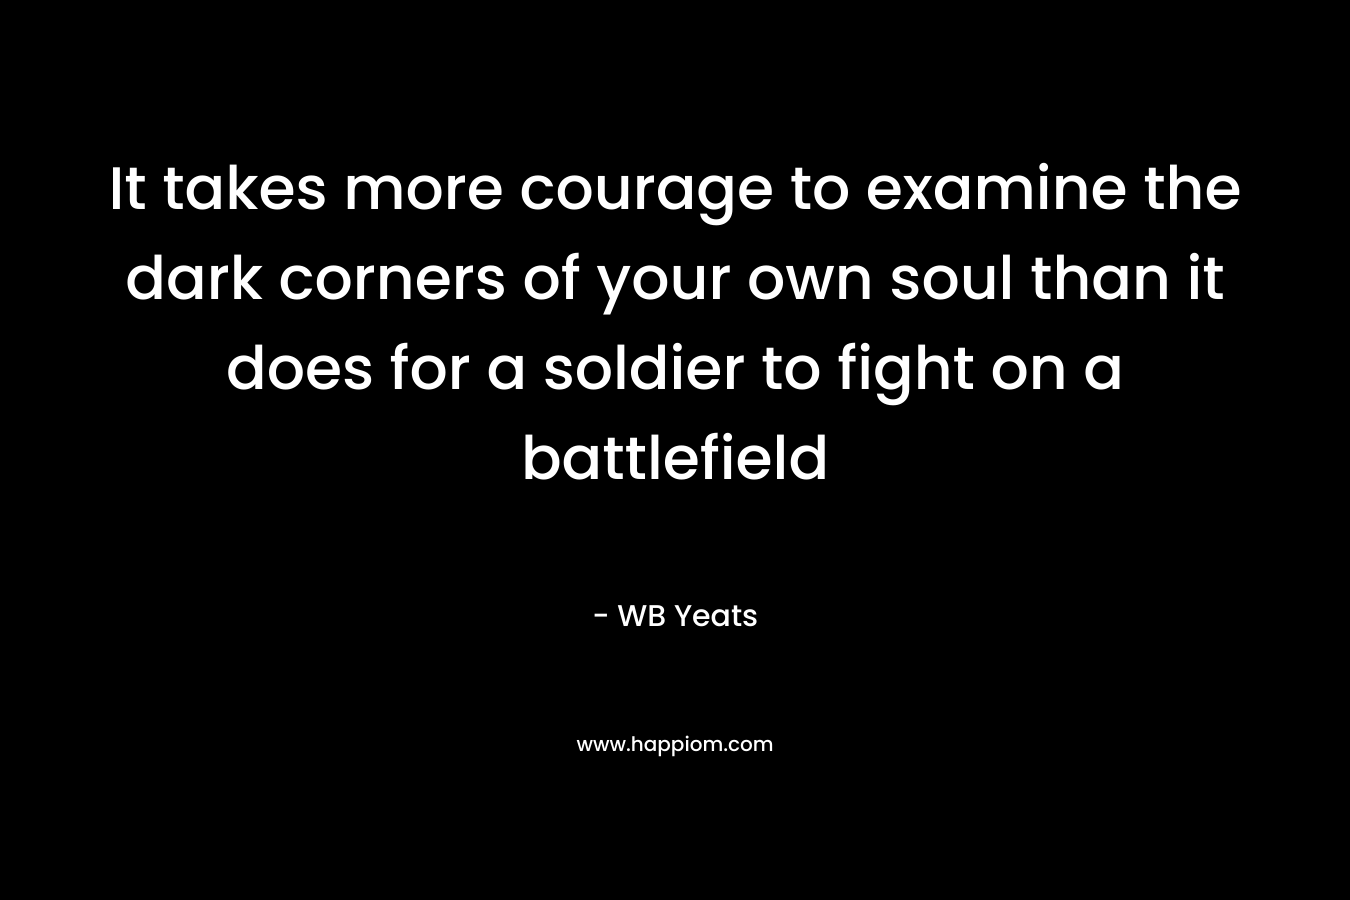 It takes more courage to examine the dark corners of your own soul than it does for a soldier to fight on a battlefield – WB Yeats